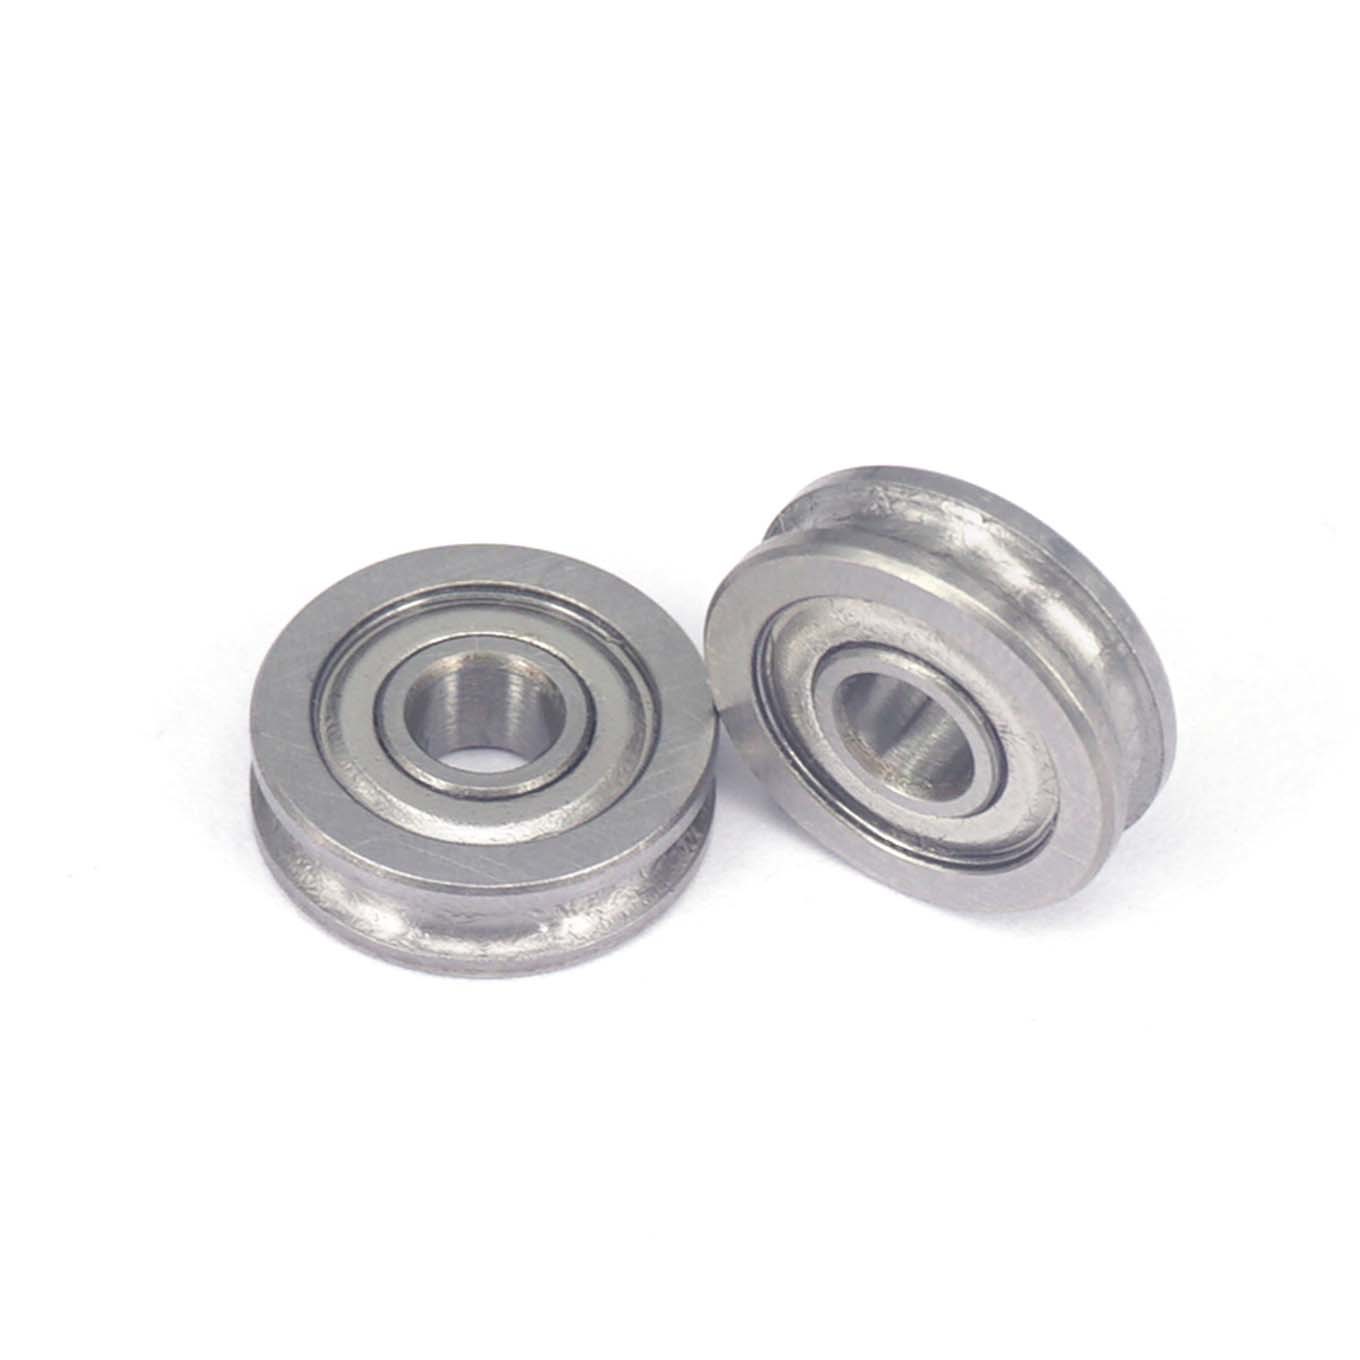 Quality 4x13x4mm Carbon Steel U604ZZ U Groove Pulley Wheels For 3D Printer for sale